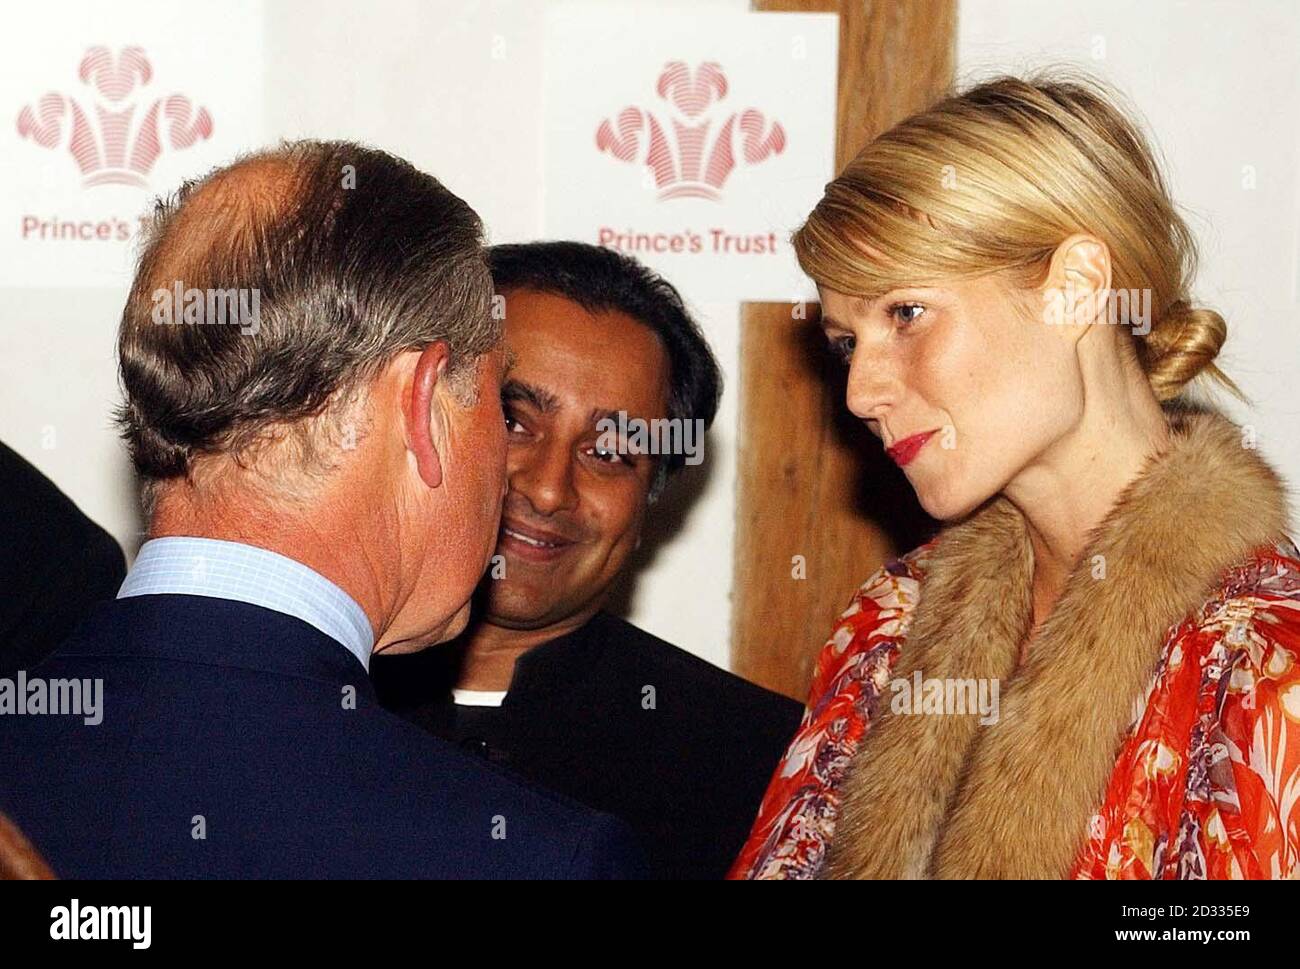 The Prince of Wales meets Sanjeev Bhaskar, star of comedy show The Kumars at No 42 and Gwyneth Paltrow at the Globe Theatre on London's South Bank, Monday September 1, 2003, after a Shakespeare Gala evening in aid of the Prince Trust. Sanjeev Bhaskar, star of comedy show The Kumars at No 42, took on the role of Bottom in A Midsummer Night s Dream and Gwyneth Paltrow delivered a monologue prior to the famous balcony scene from Romeo and Juliet.  The gala evening has already raised  100,000 in aid of the Prince's Trust, which aims to help disadvantaged youngsters. Stock Photo